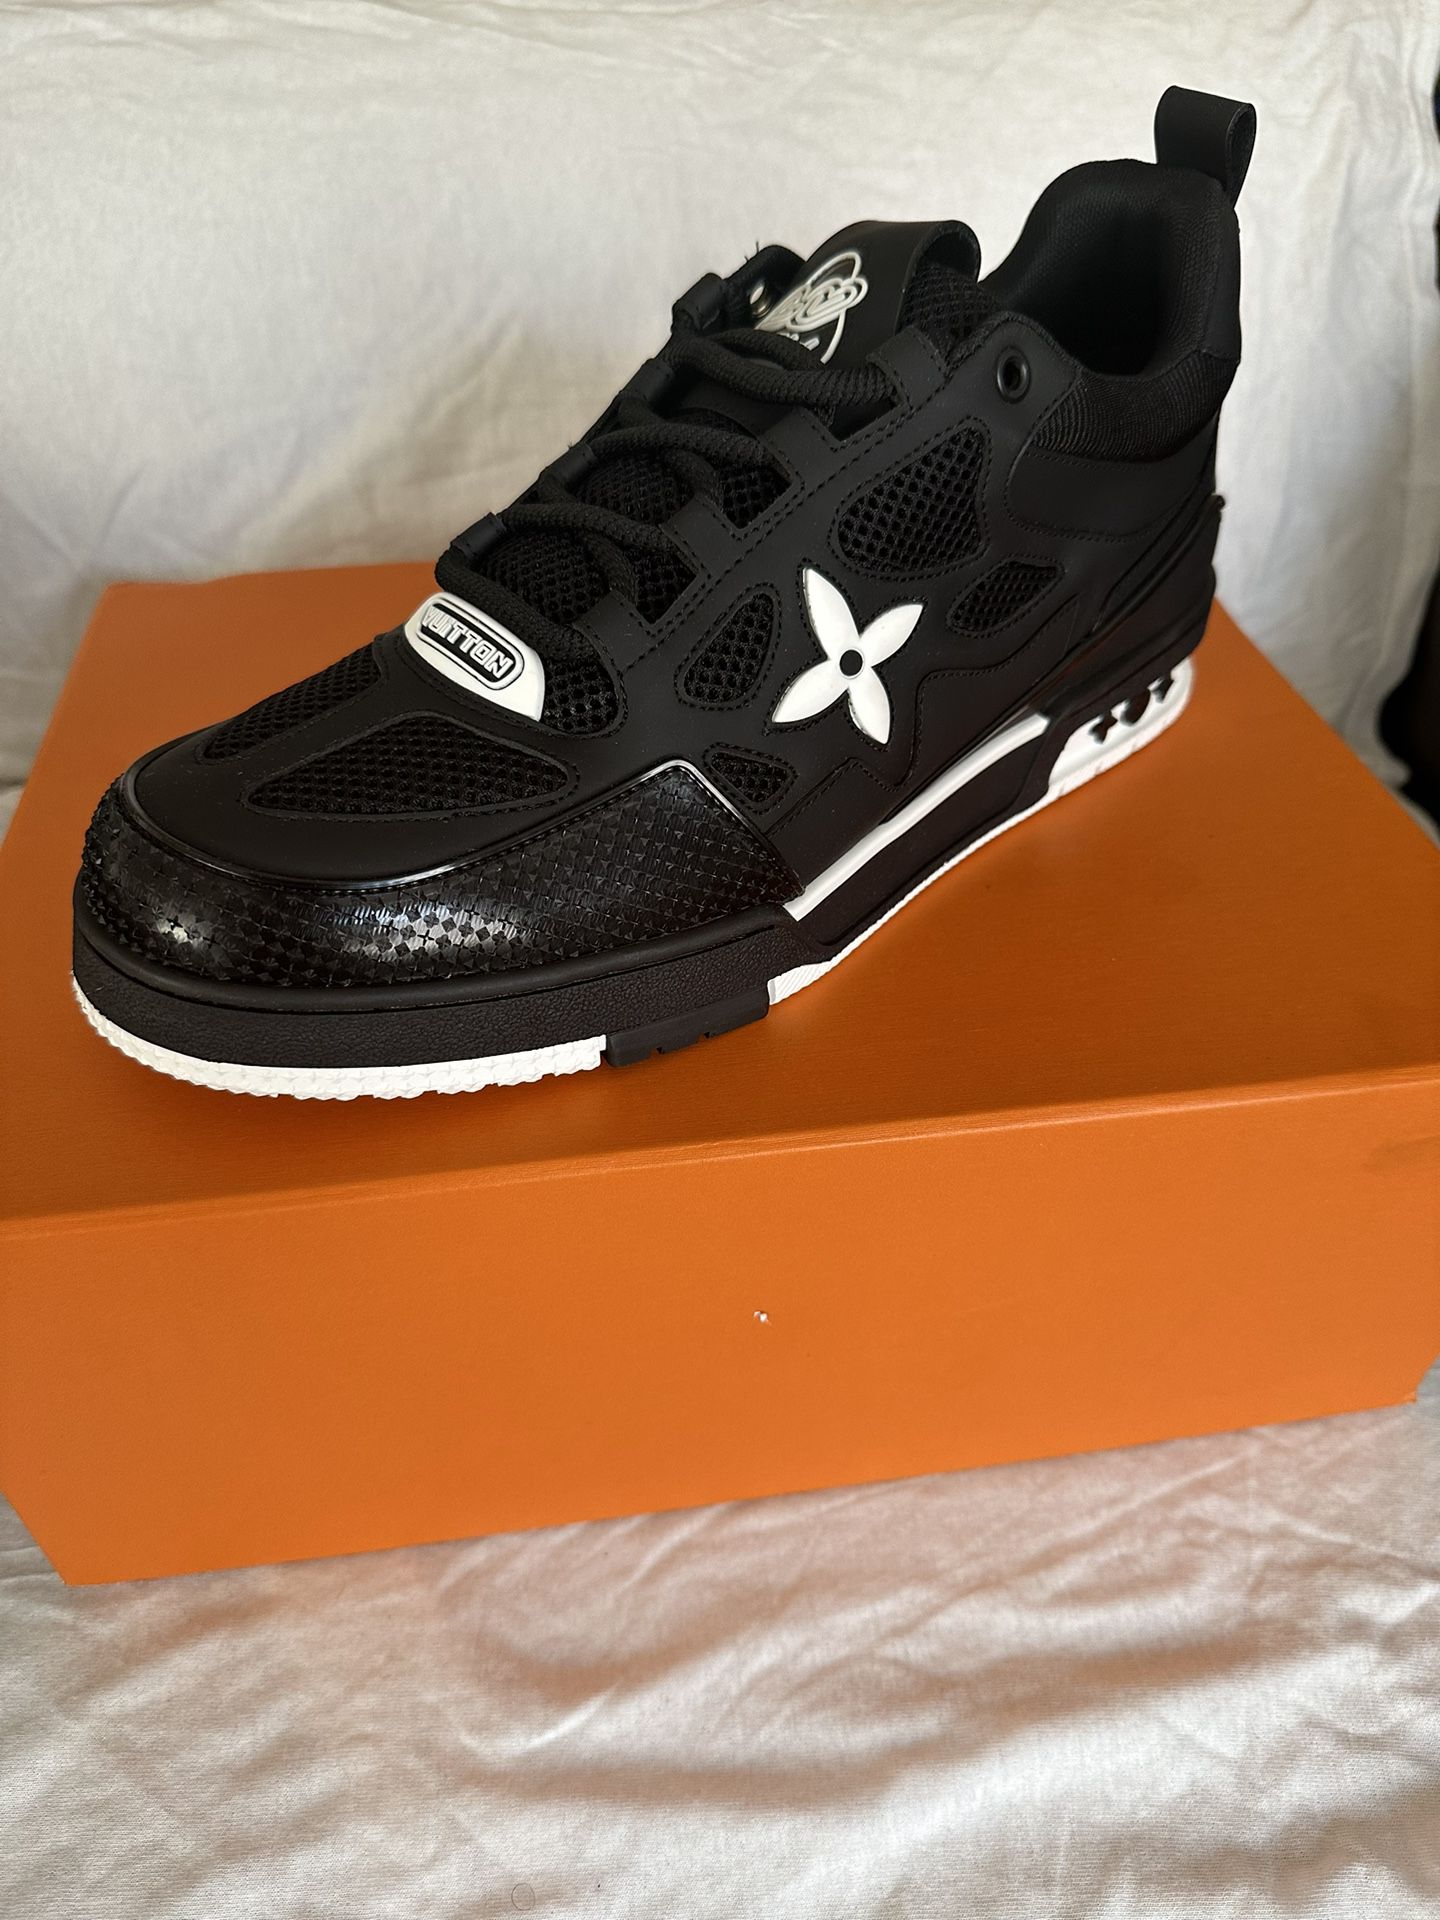 Louis Vuitton vnr sneakers for Sale in Gladwyne, PA - OfferUp